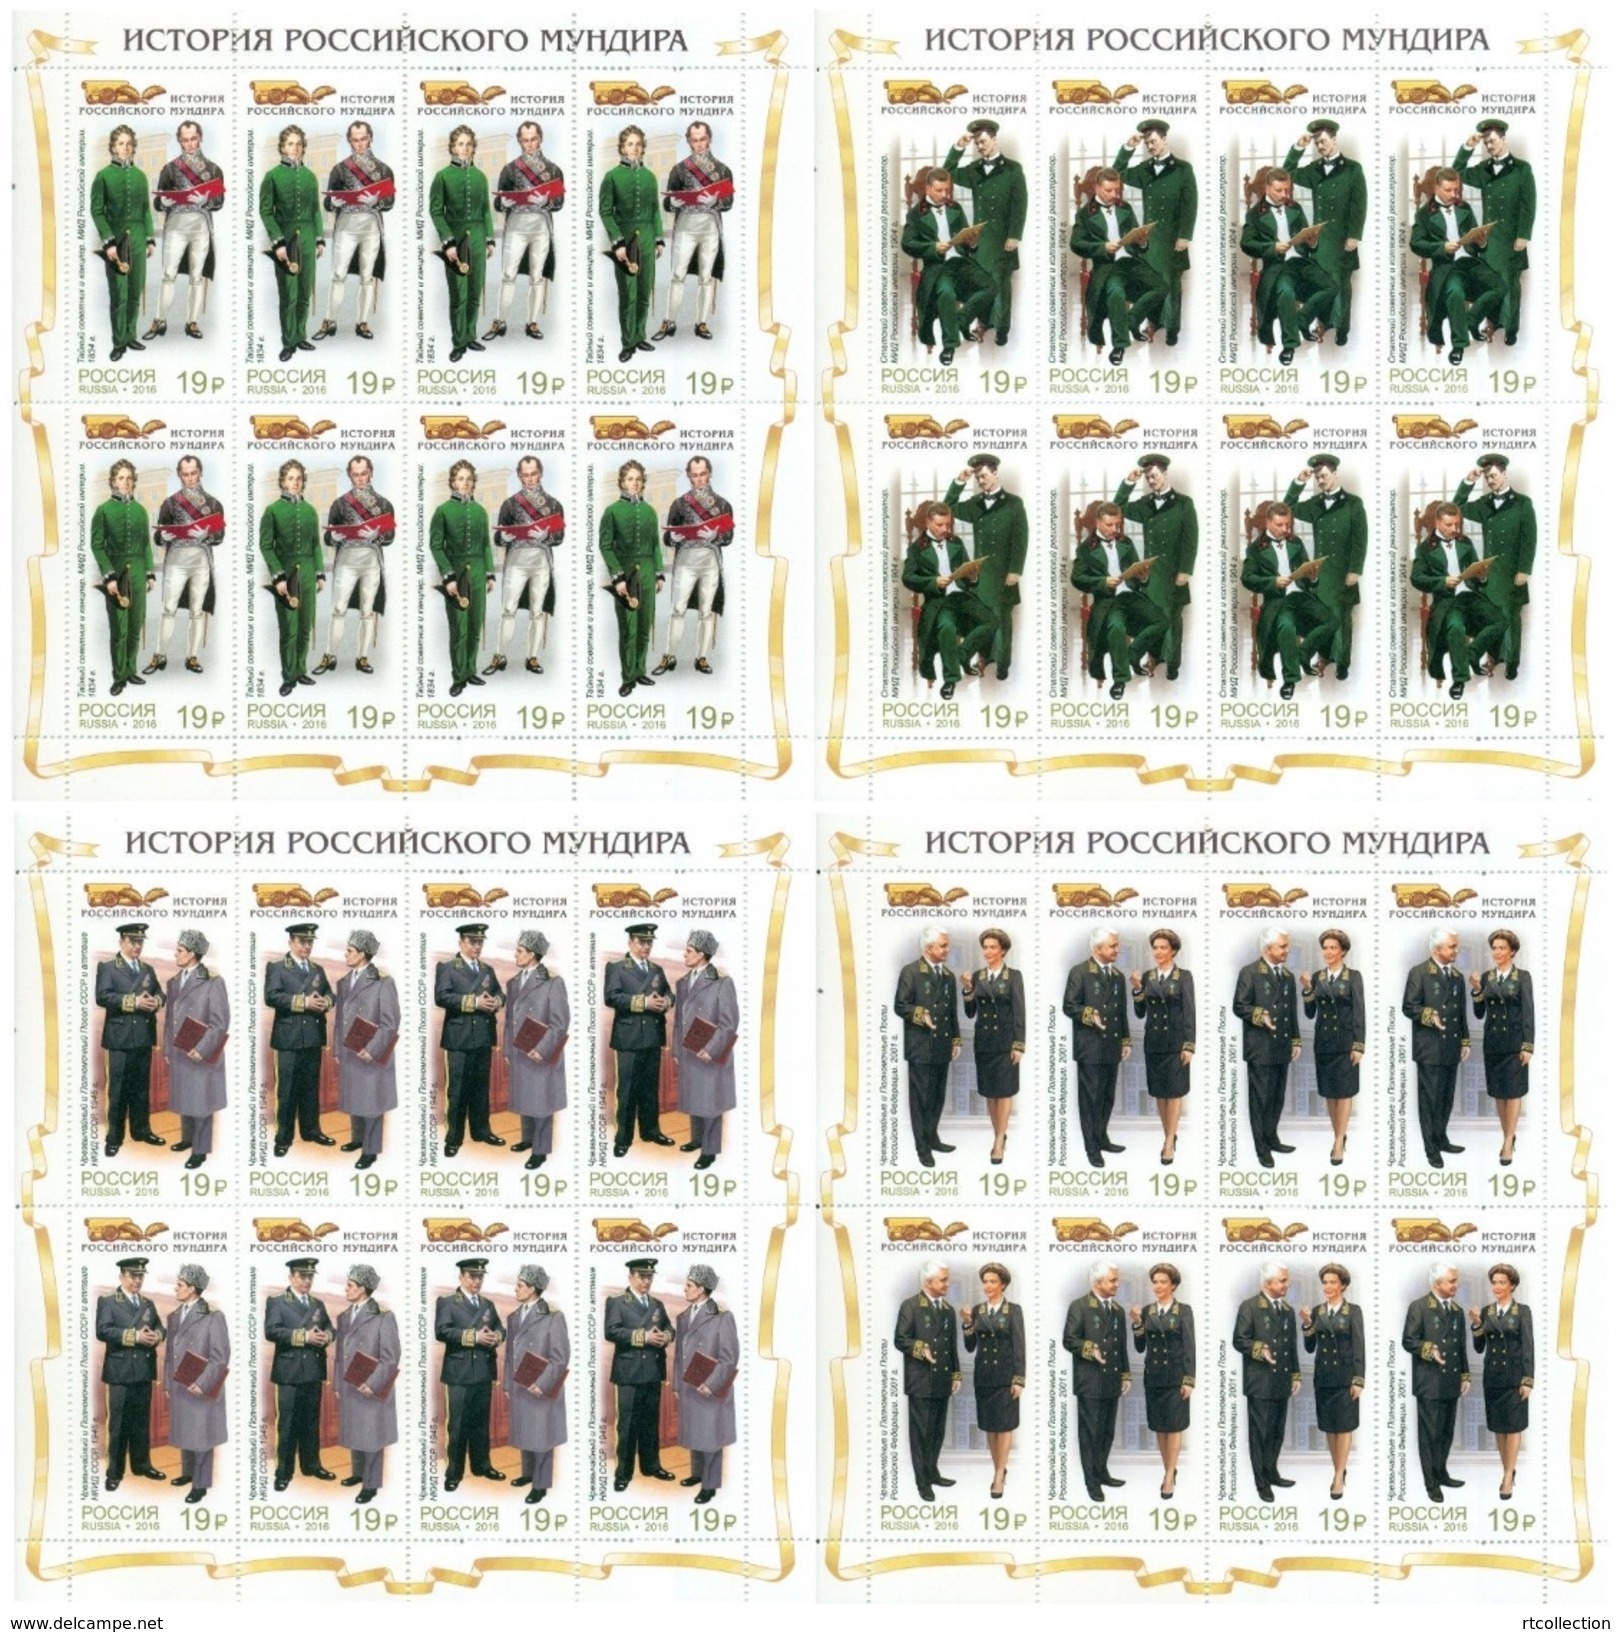 Russia 2016 4 Full Sheet History Russian Uniform Jacket Diplomatic Service Cloth Cultures Stamps MNH - Collections